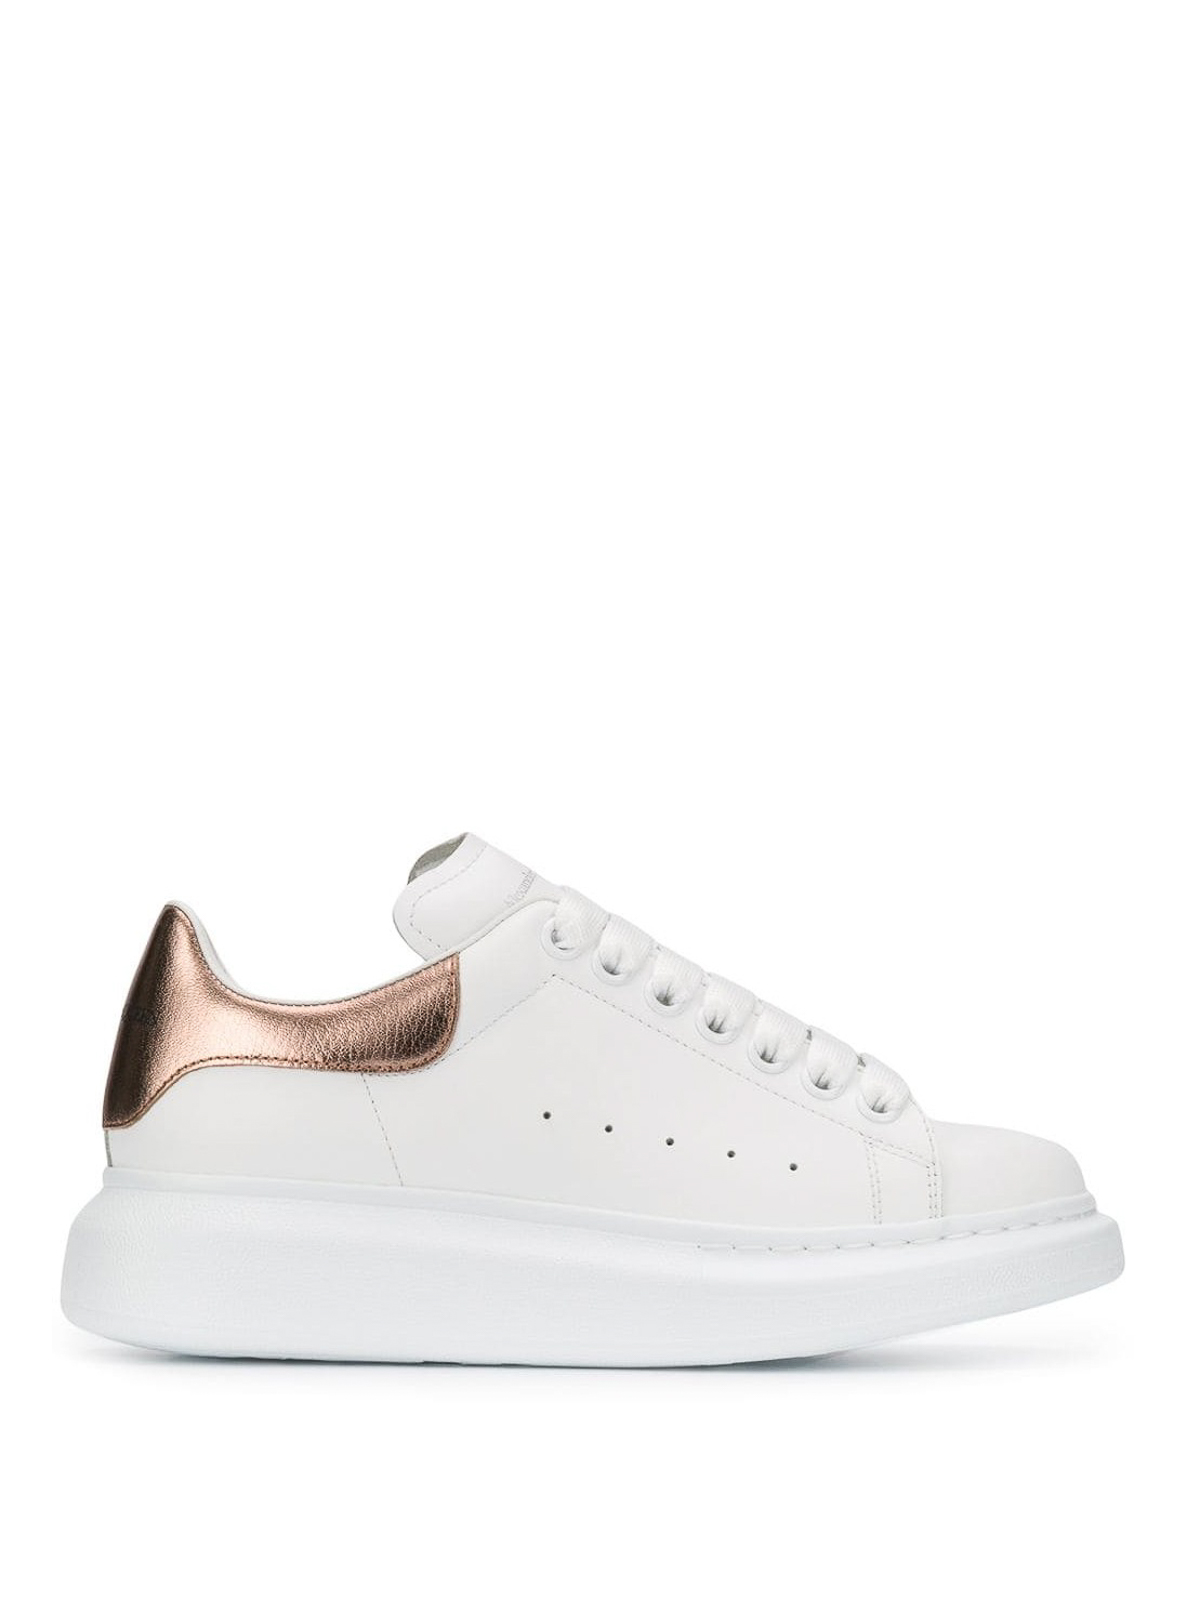 Trainers Alexander Mcqueen - Oversize smooth leather sneakers ...